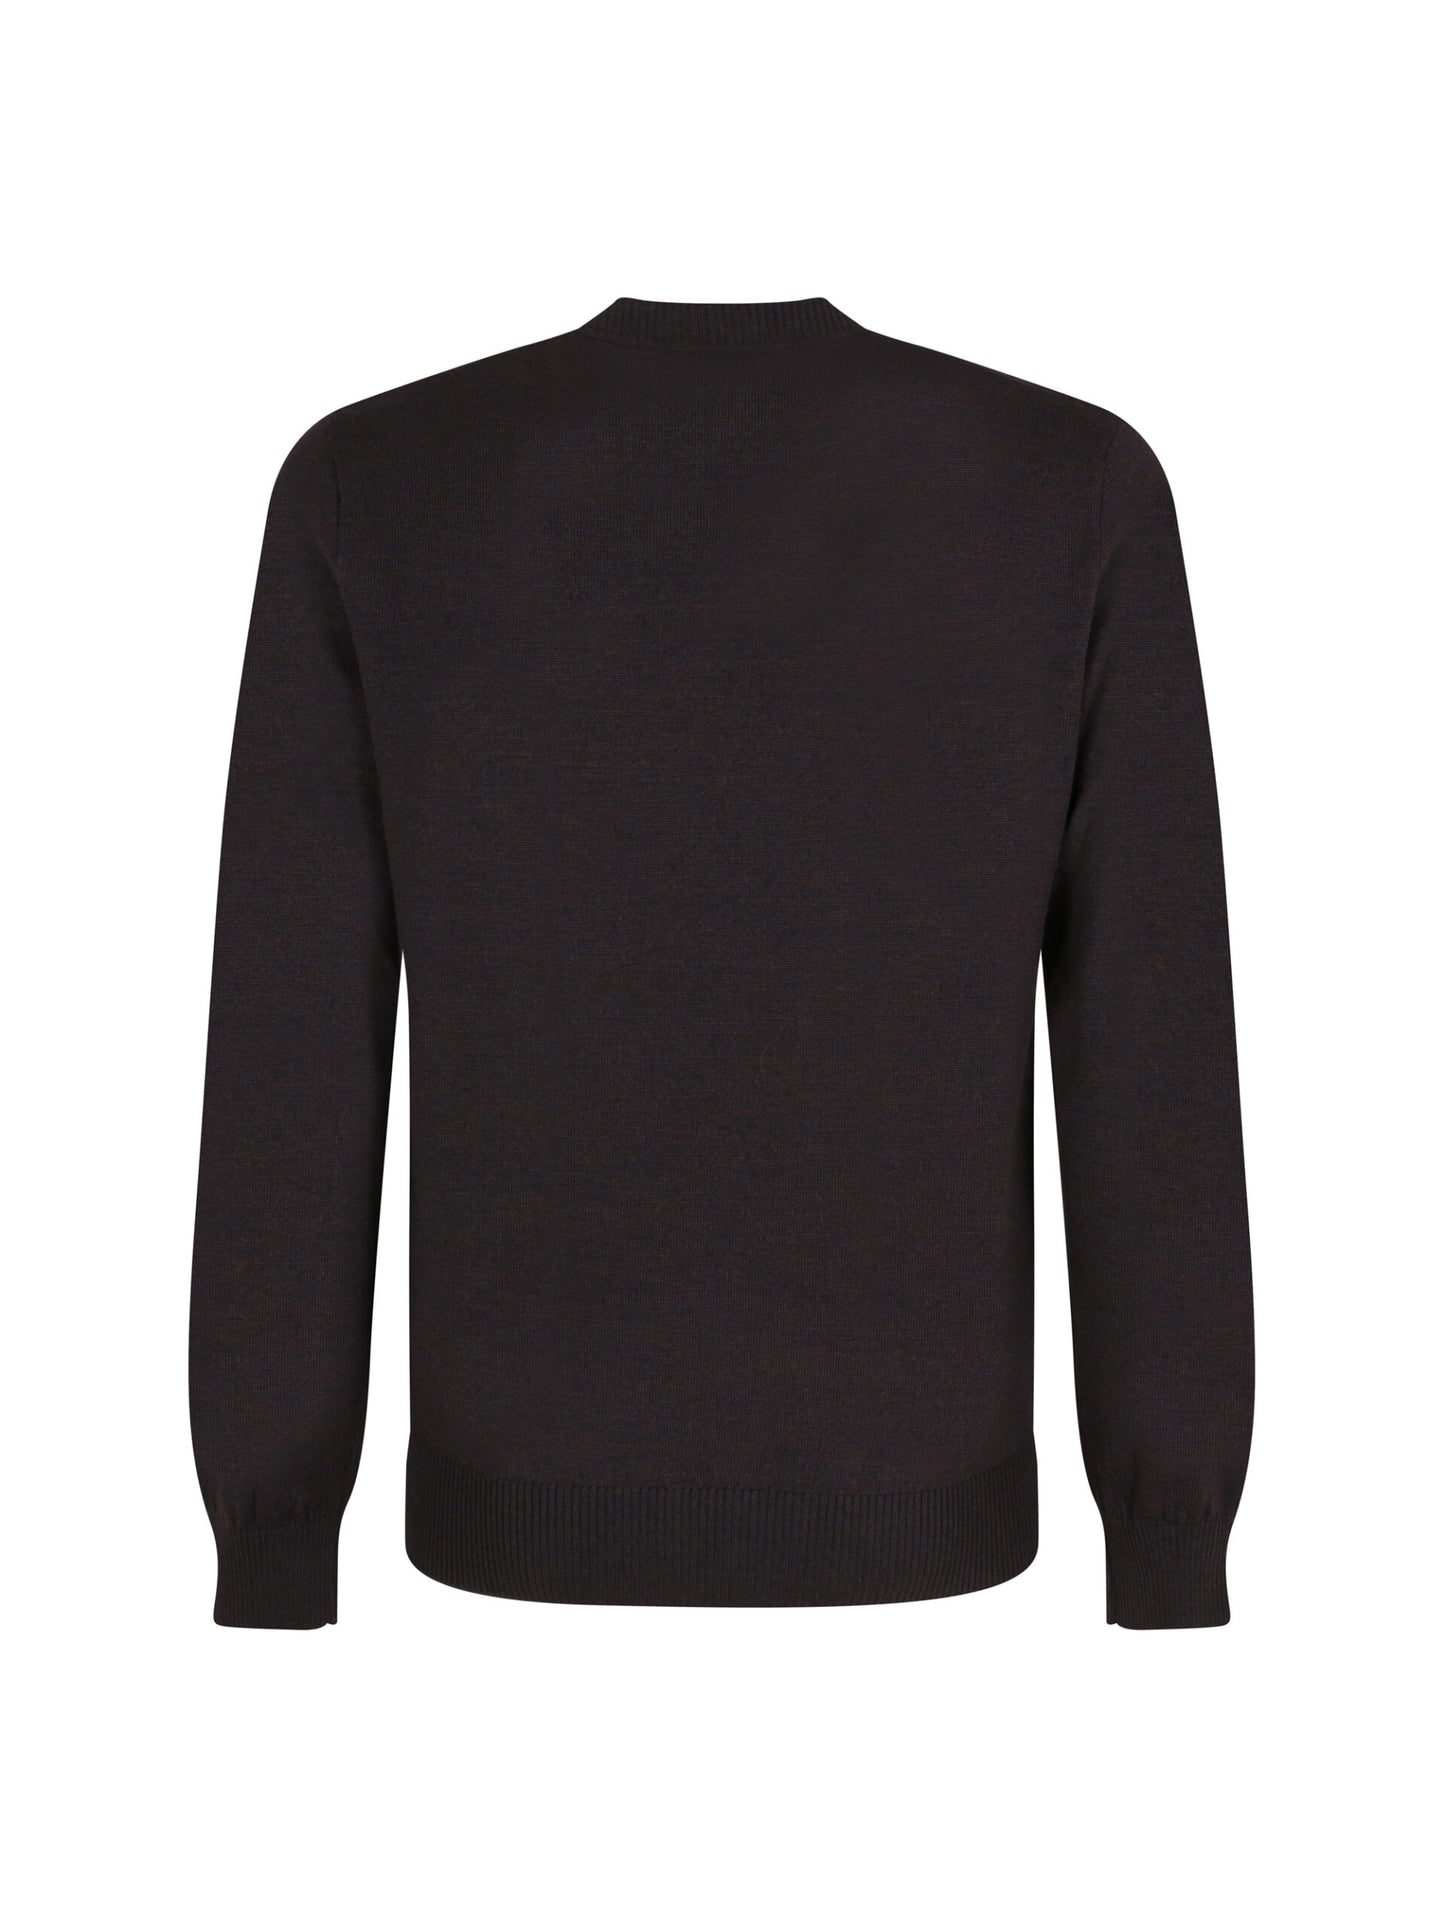 Elevate Your Style with Chic Wool Sweater